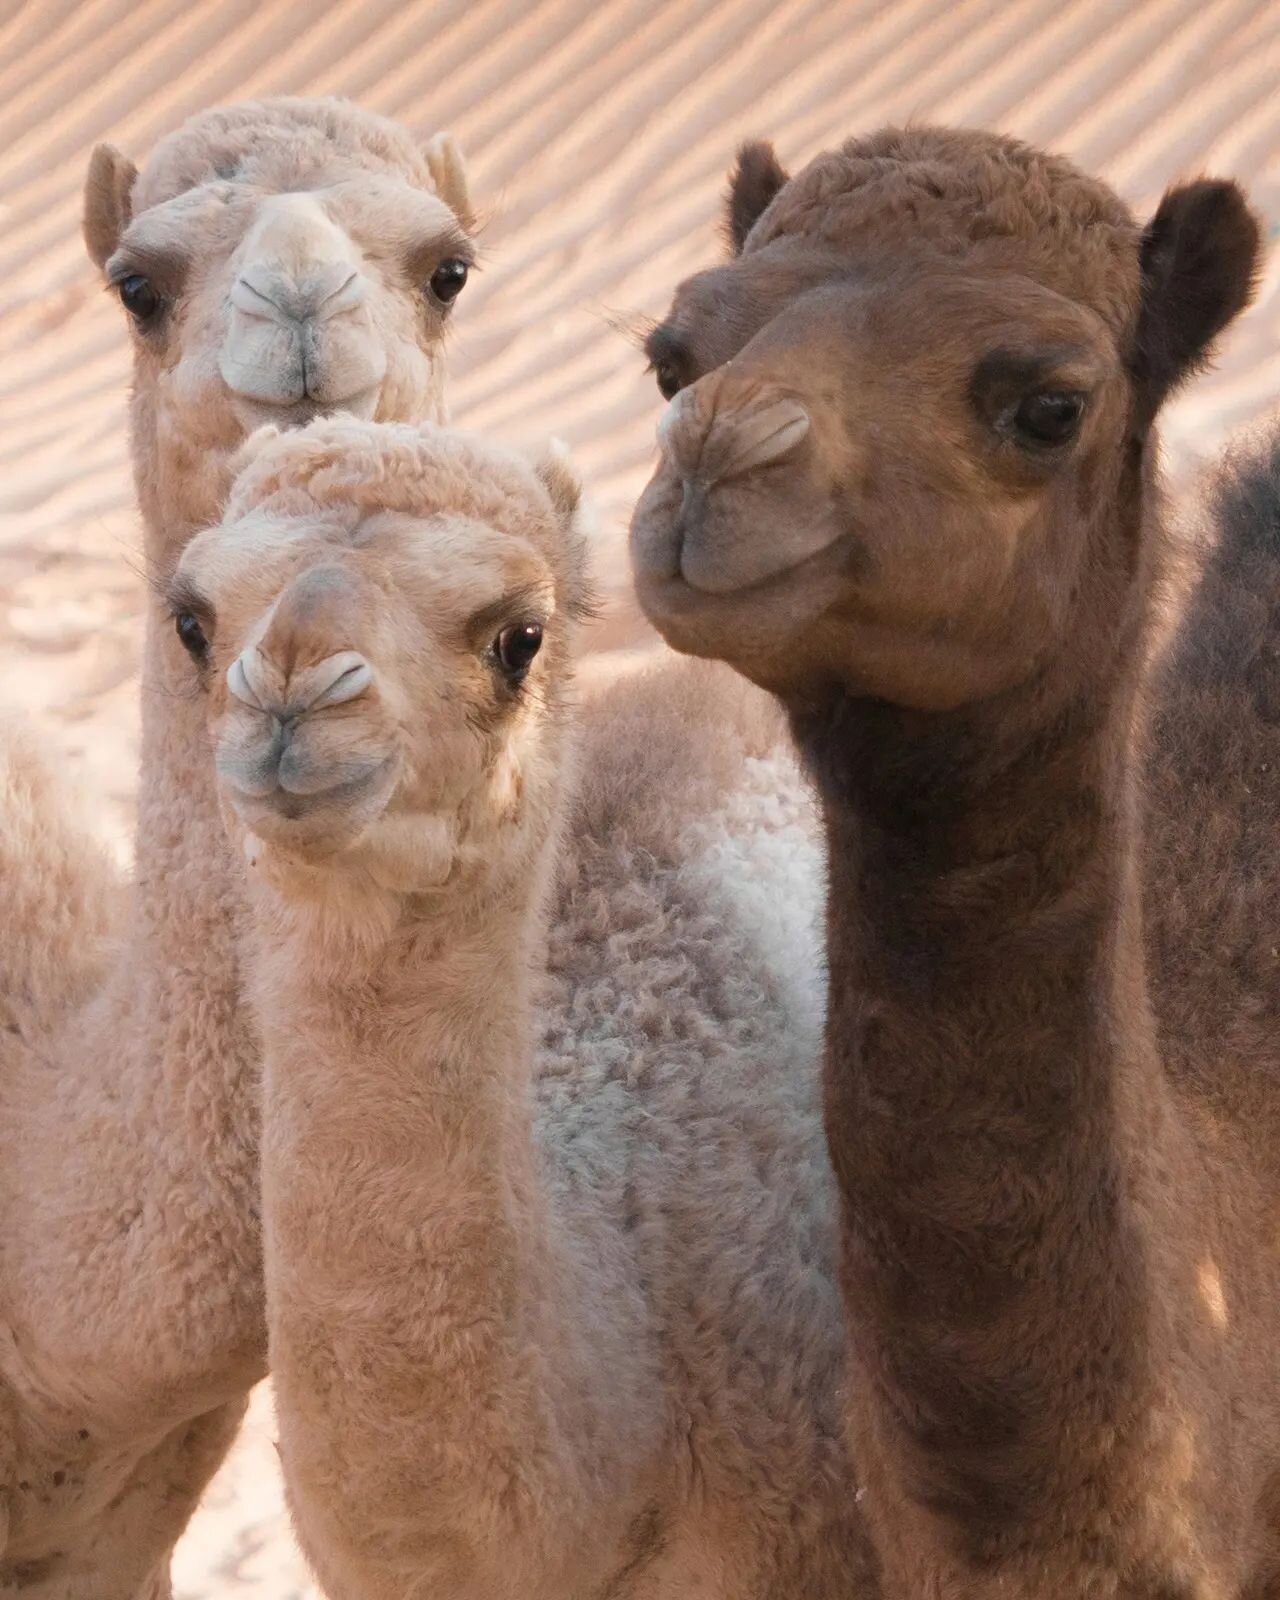 Great news, camel lovers!! 🎉
The Camel Farm is coming back and will reopen in a few days! Thank you for all your messages and inquiries, we'll go through them, one by one, in these coming days! New animals are coming, new activities, new friends, ne